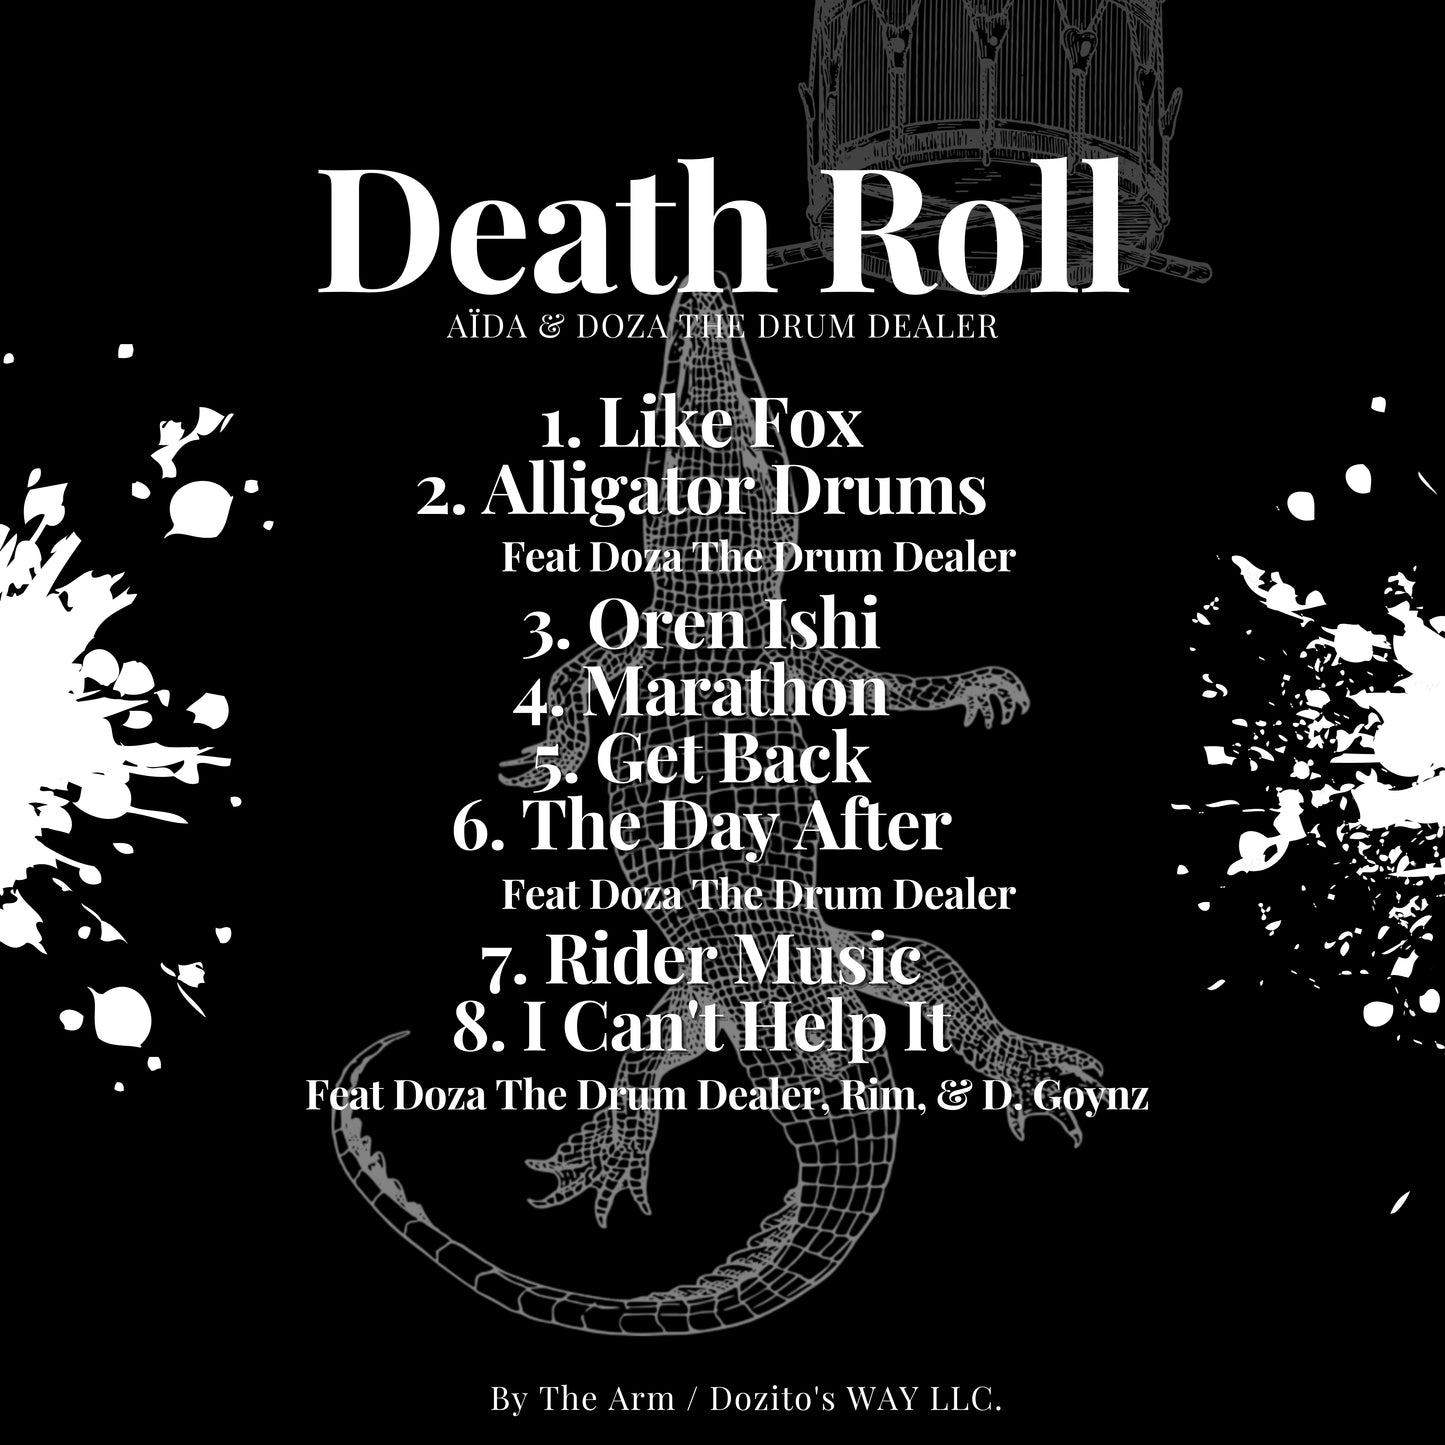 Death Roll The Album by Aïda and Doza the Drum Dealer